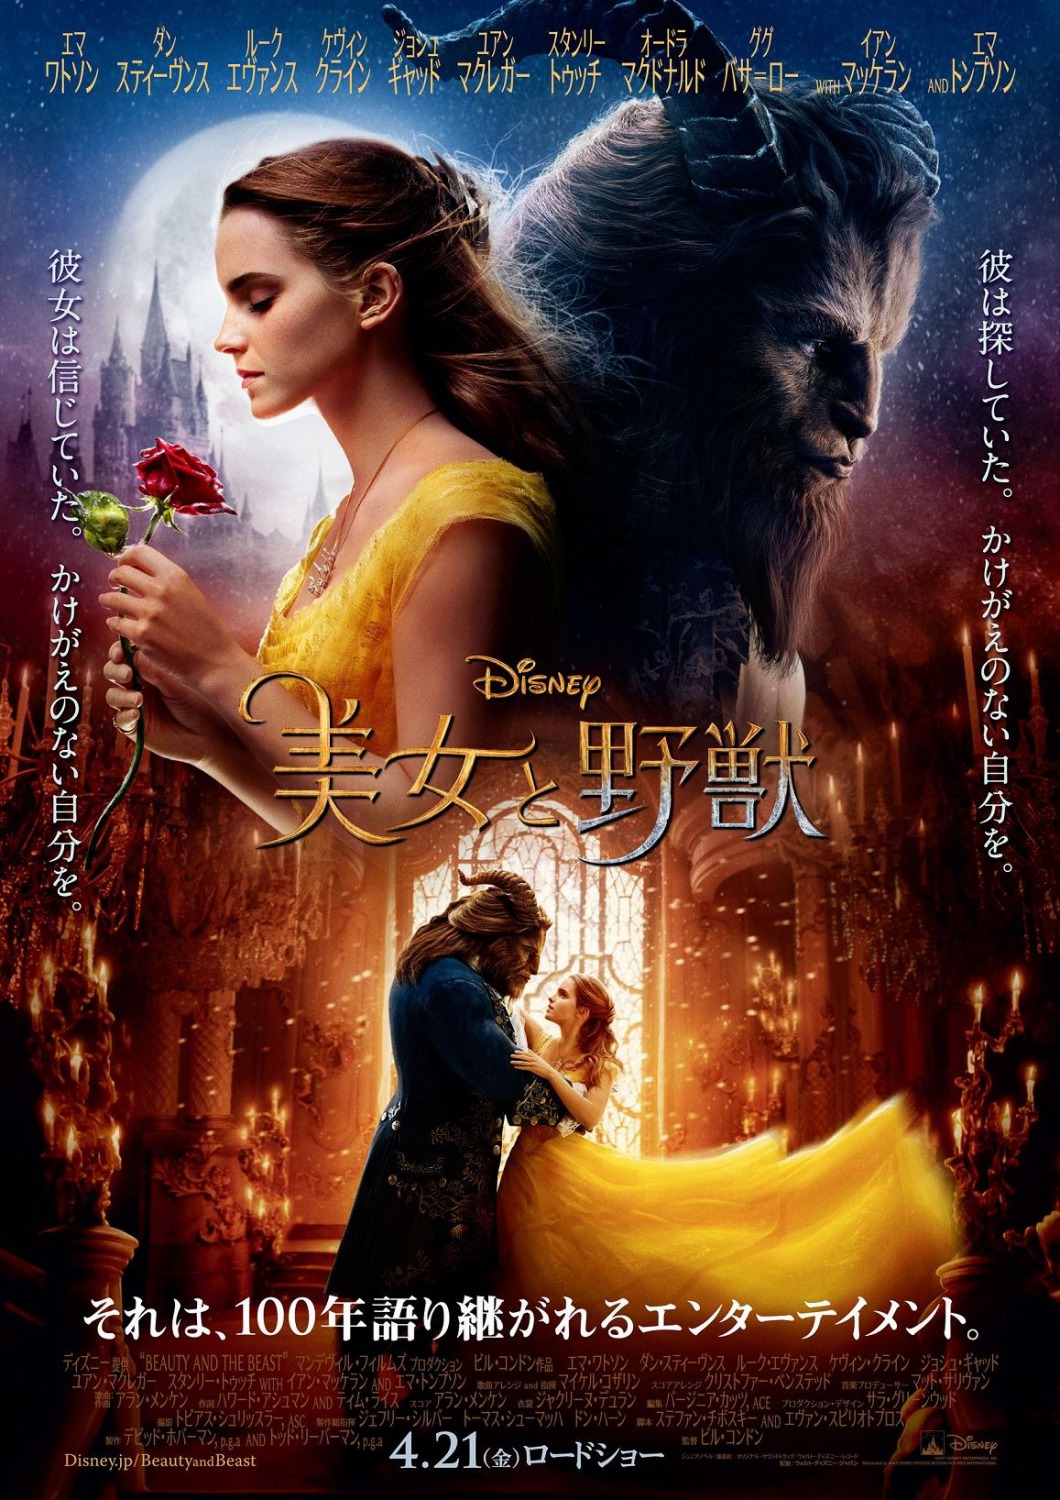 Extra Large Movie Poster Image for Beauty and the Beast (#30 of 34)